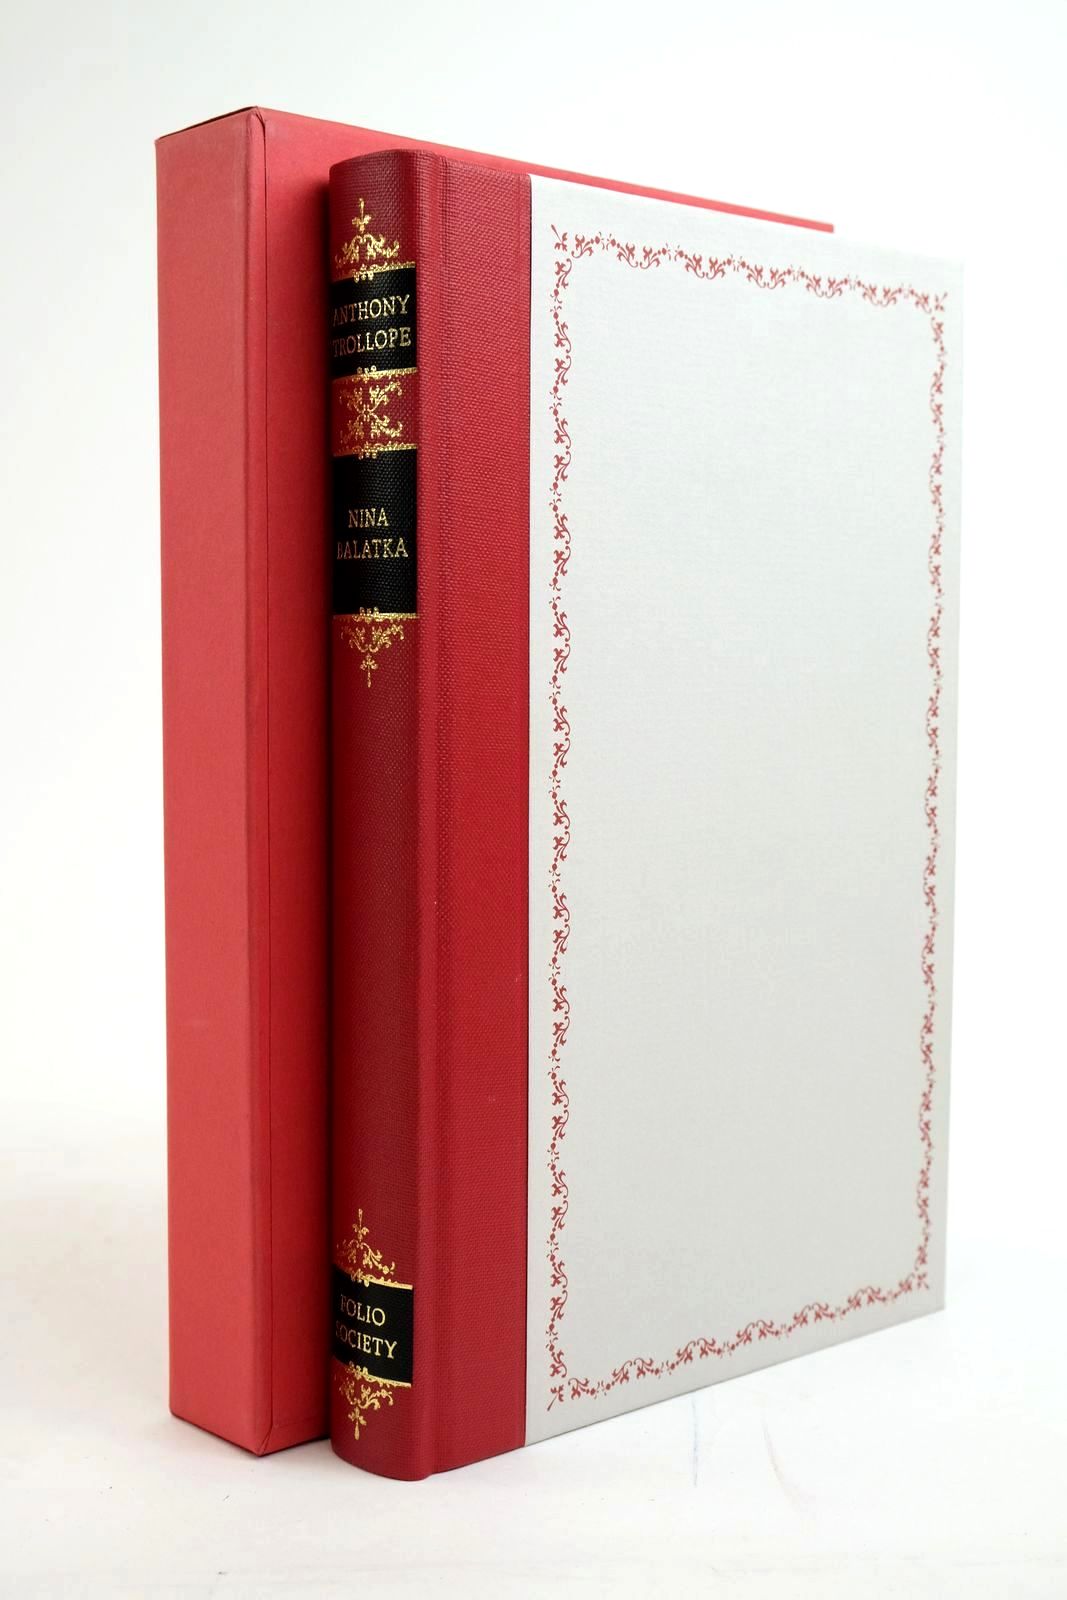 Photo of NINA BALATKA written by Trollope, Anthony Thirlwell, Angela illustrated by Waters, Rod published by Folio Society (STOCK CODE: 1321406)  for sale by Stella & Rose's Books